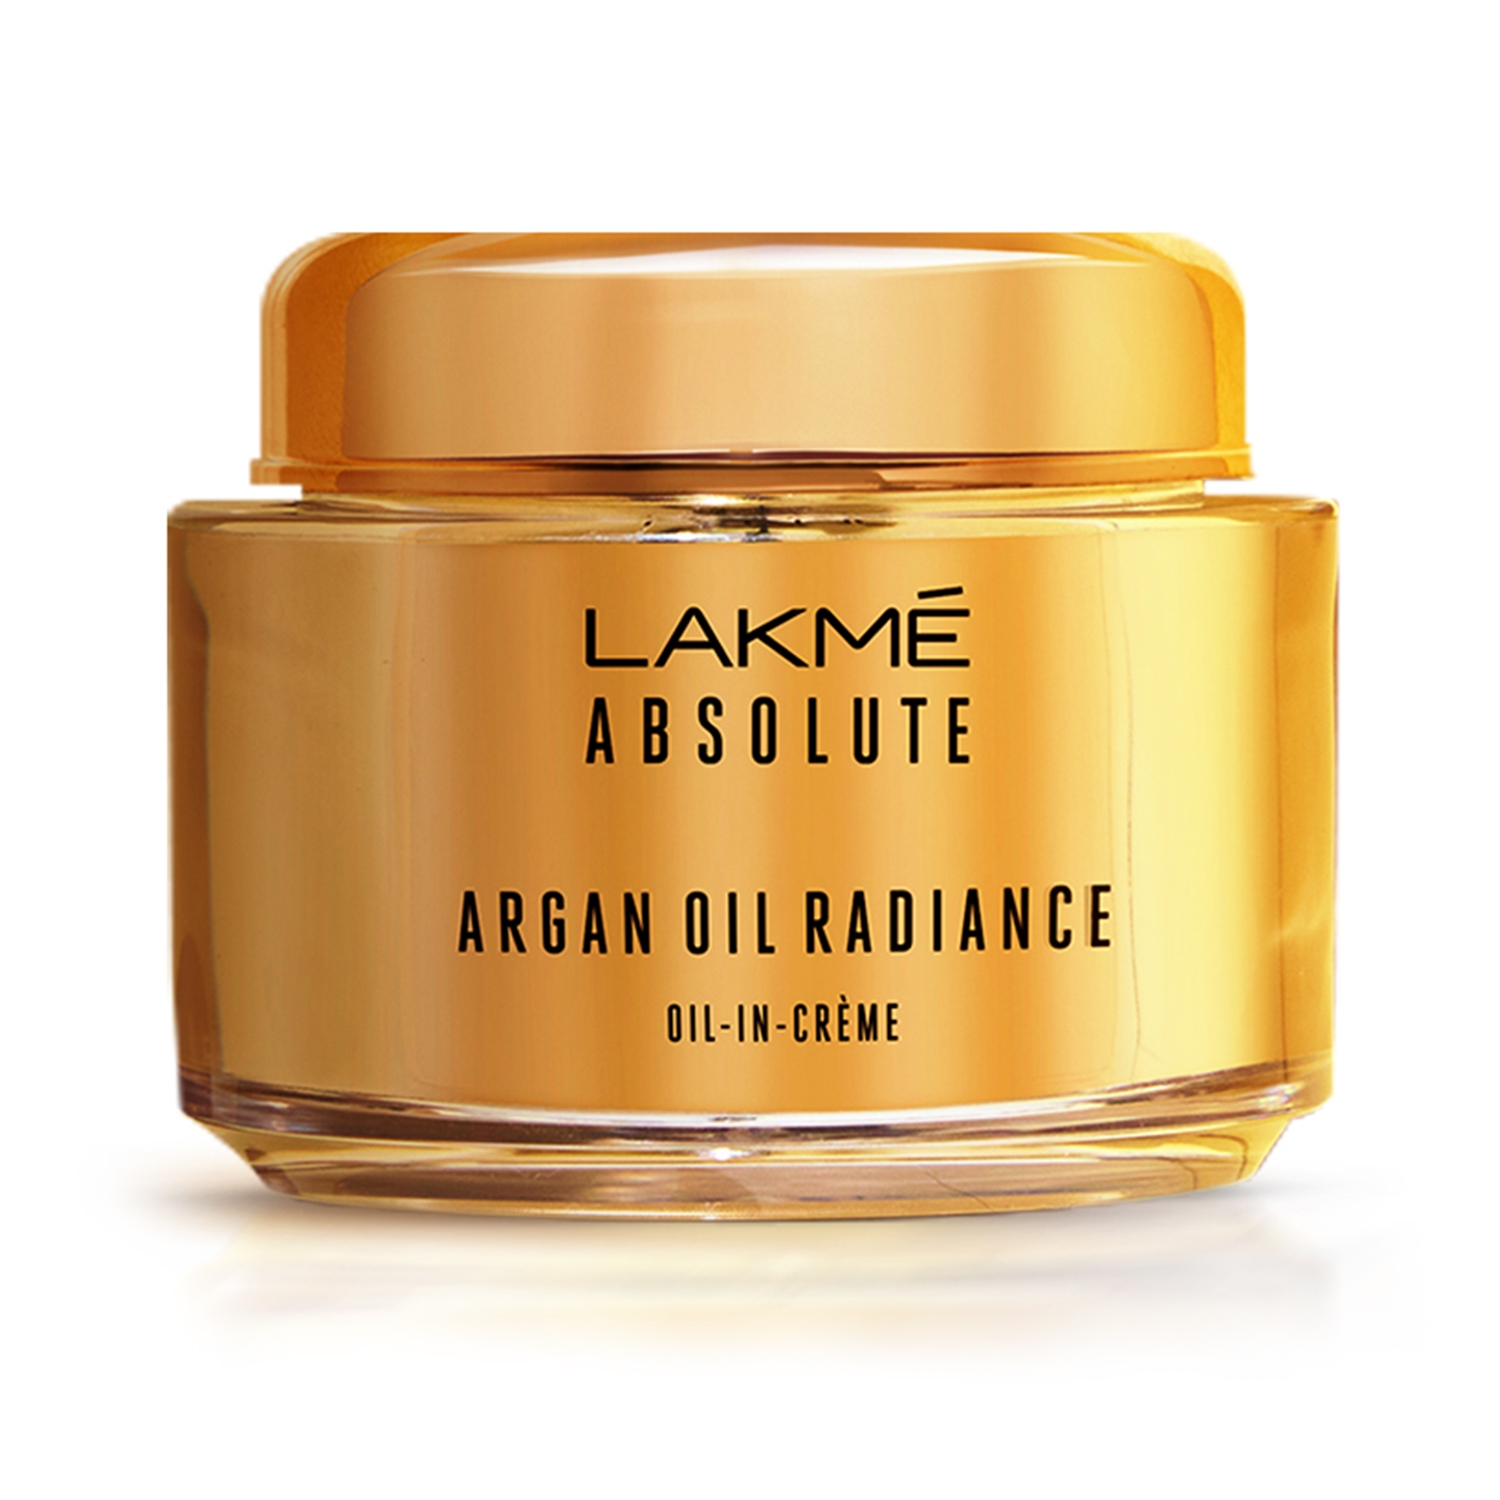 Lakme | Lakme Absolute Argan Oil Radiance Oil-In-Creme (50g)